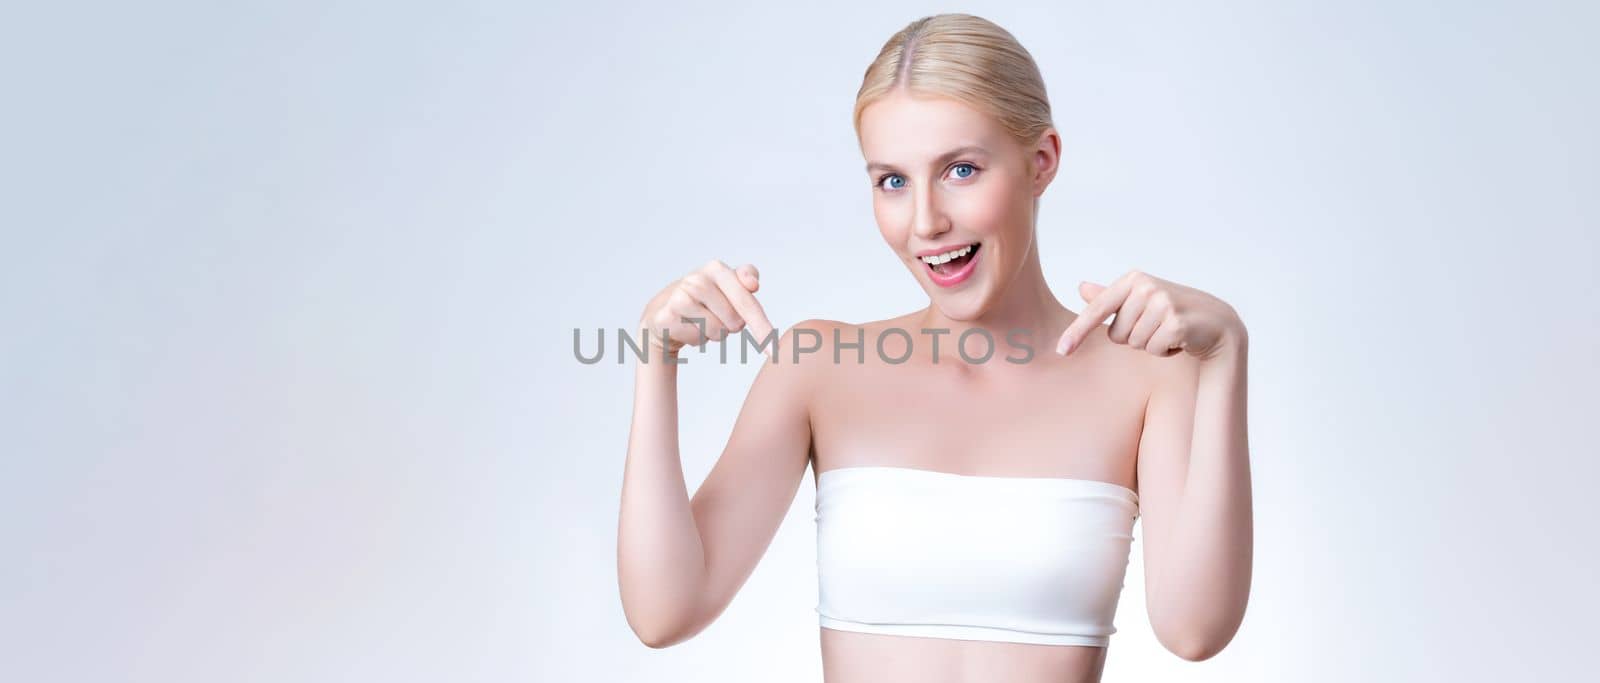 Personable beautiful woman with perfect makeup clean skin pointing finger in copyspace isolated background. Promotion indicated by hand gesture concept for skincare product advertisement.